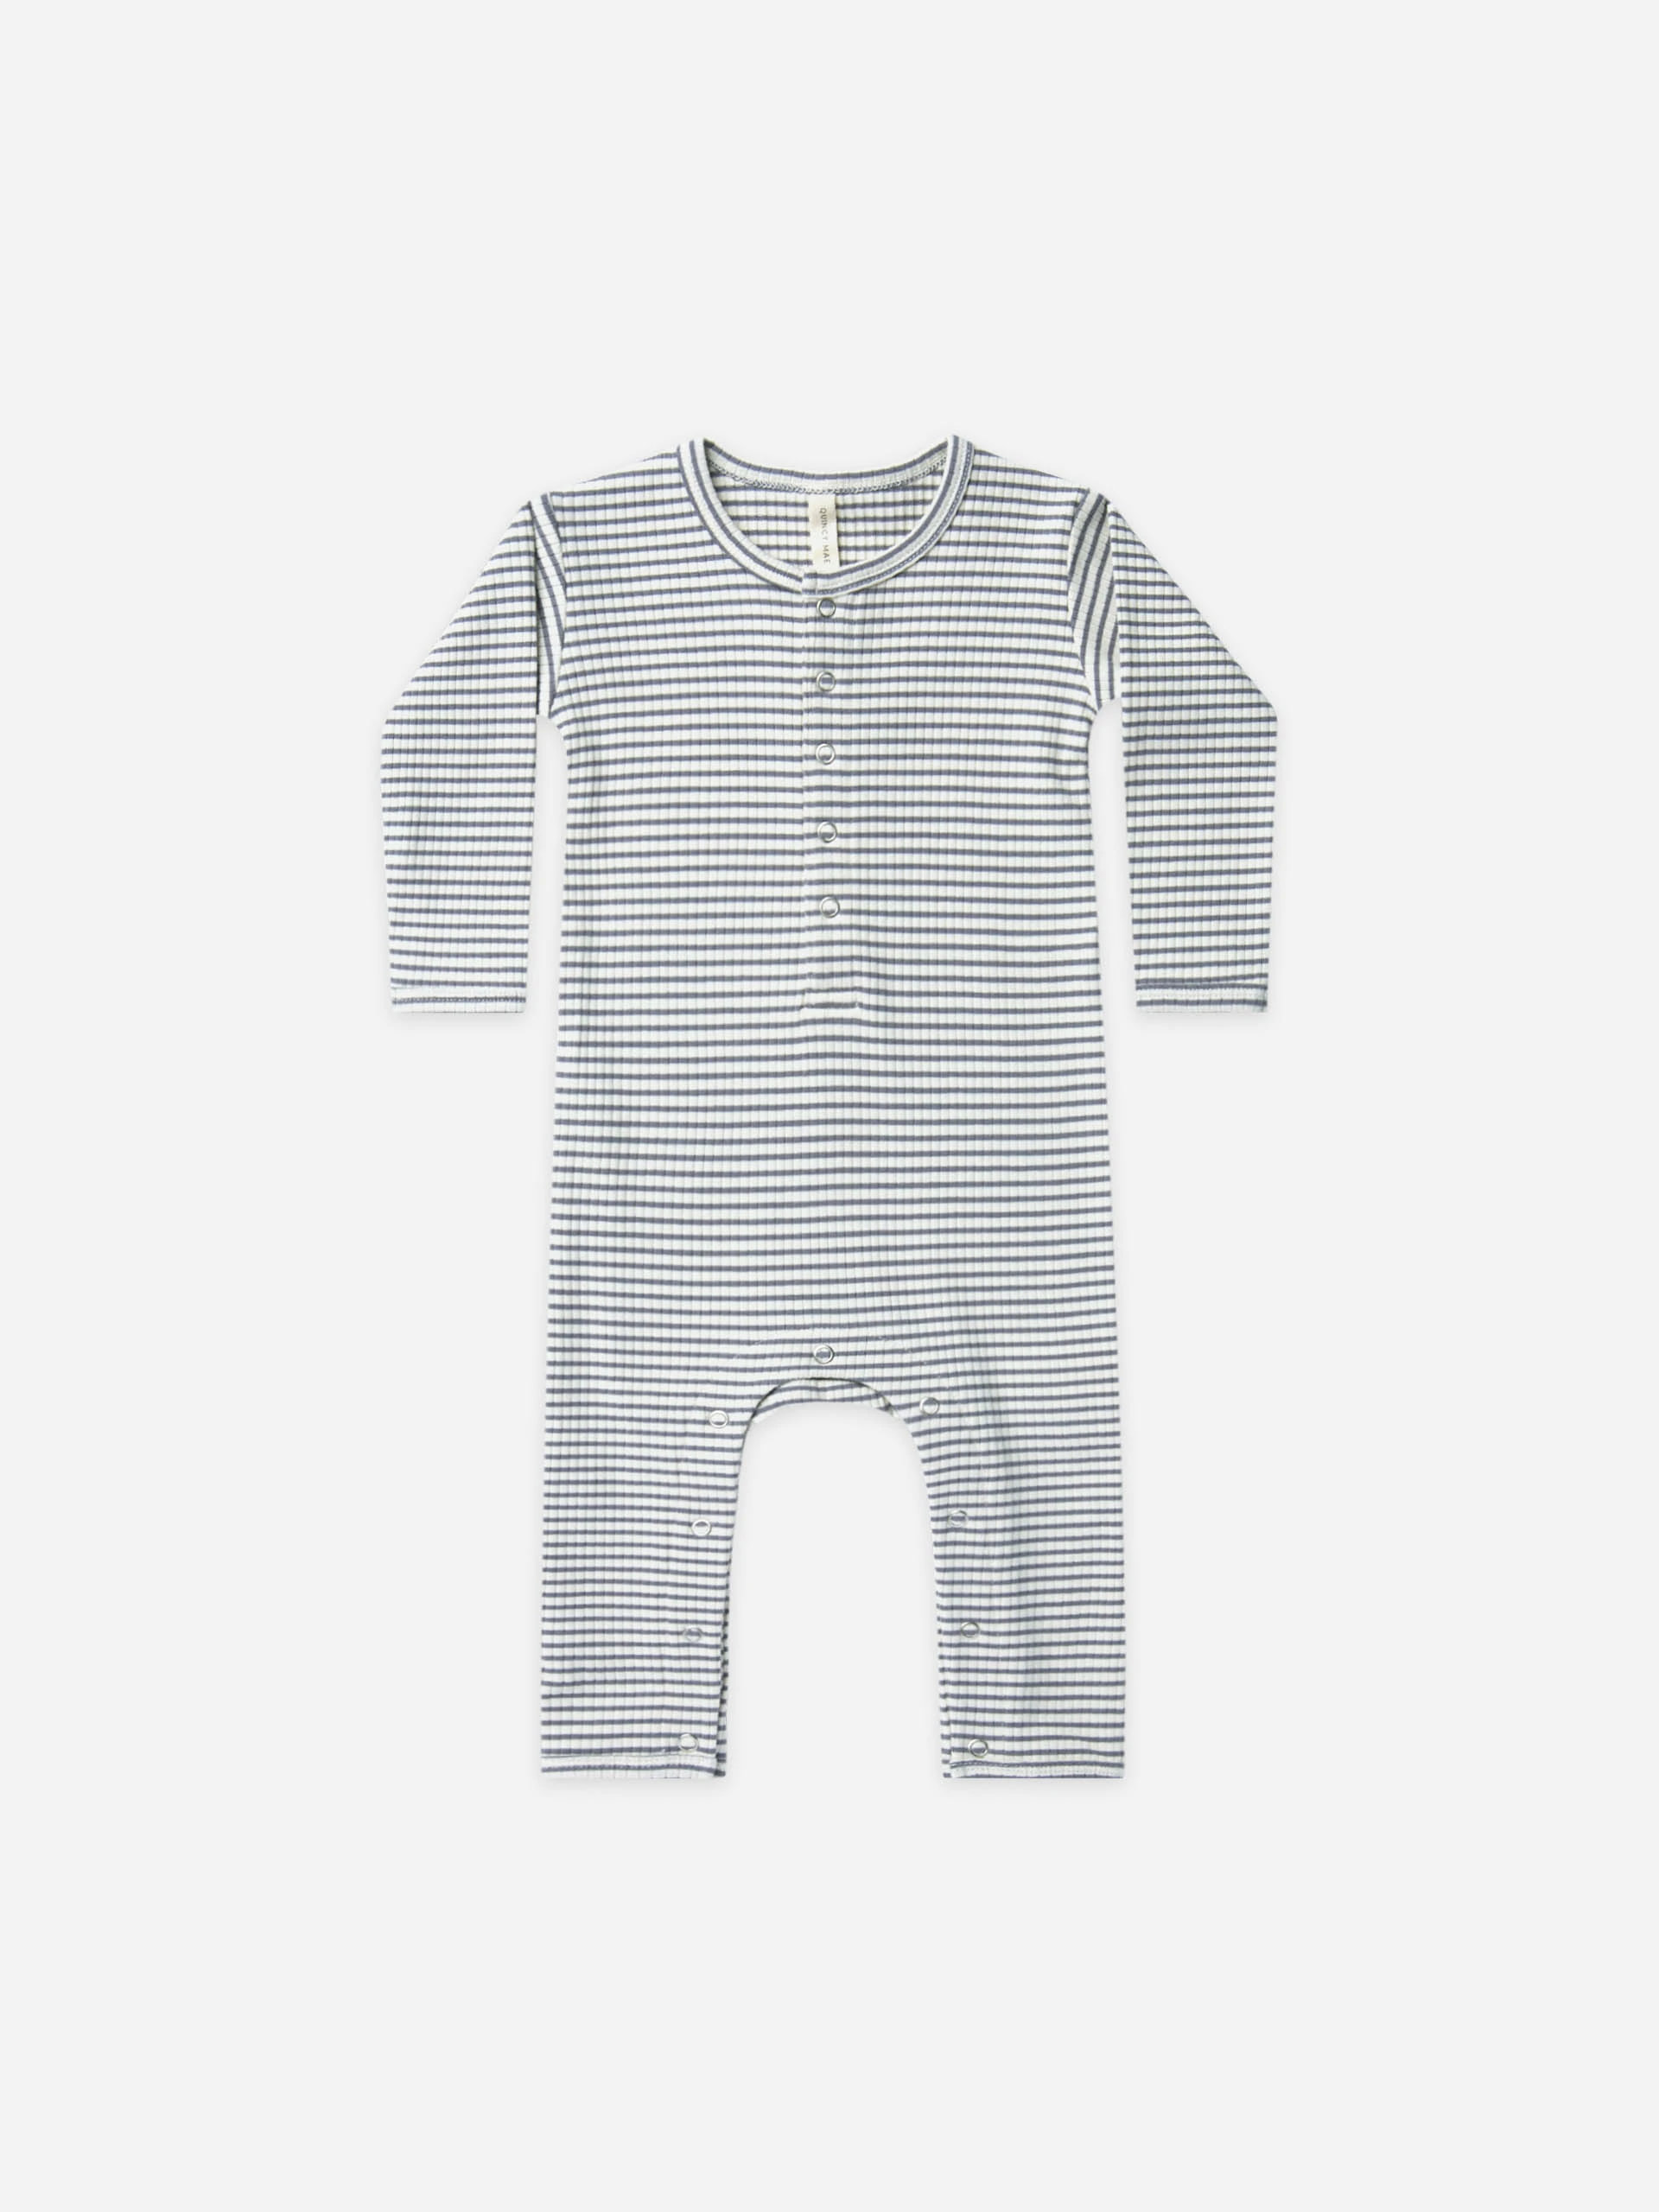 Ribbed Baby Jumpsuit - Quincy Mae | Dandelion